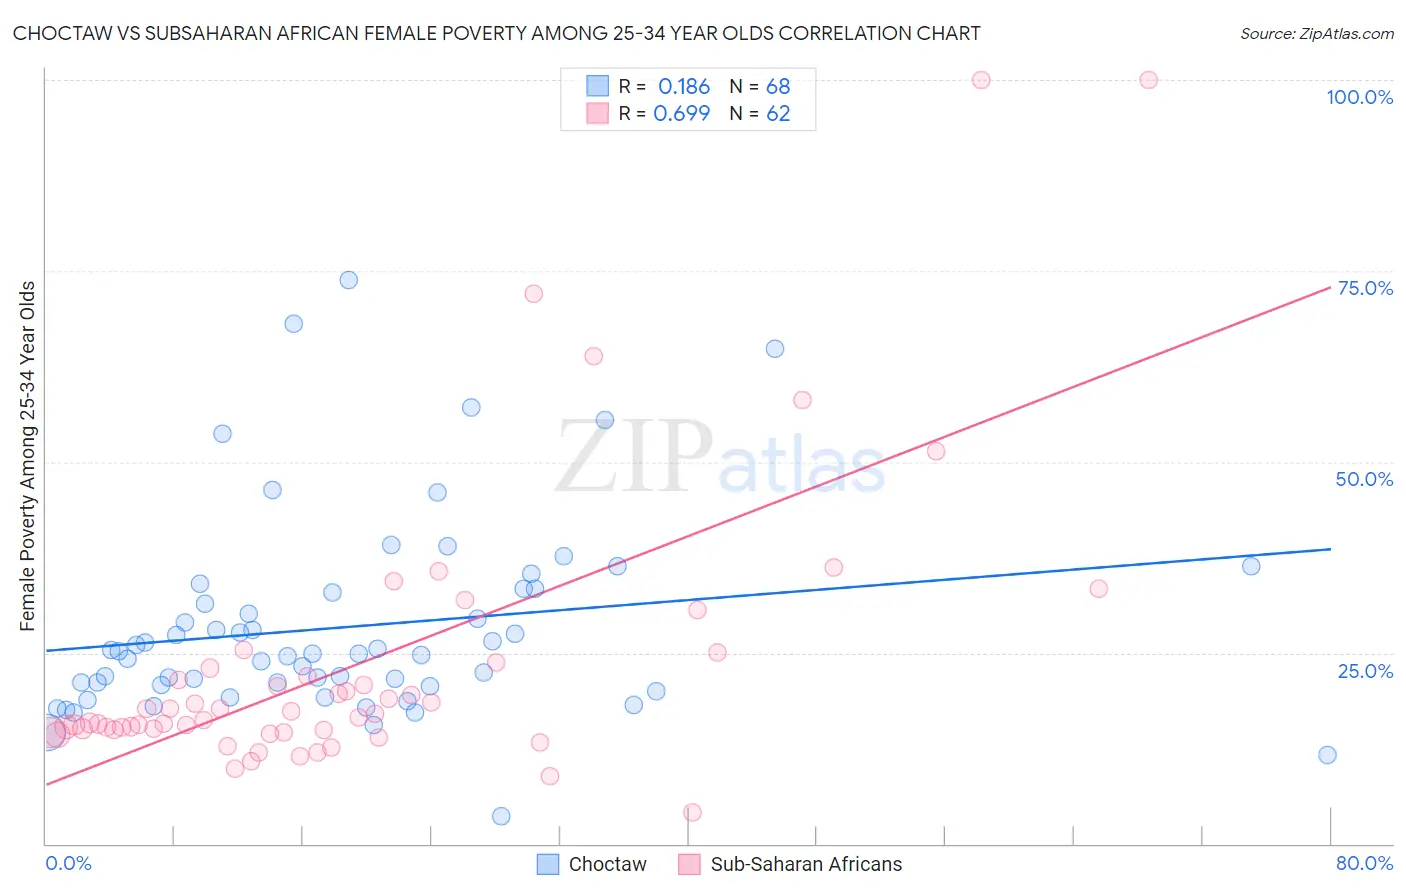 Choctaw vs Subsaharan African Female Poverty Among 25-34 Year Olds